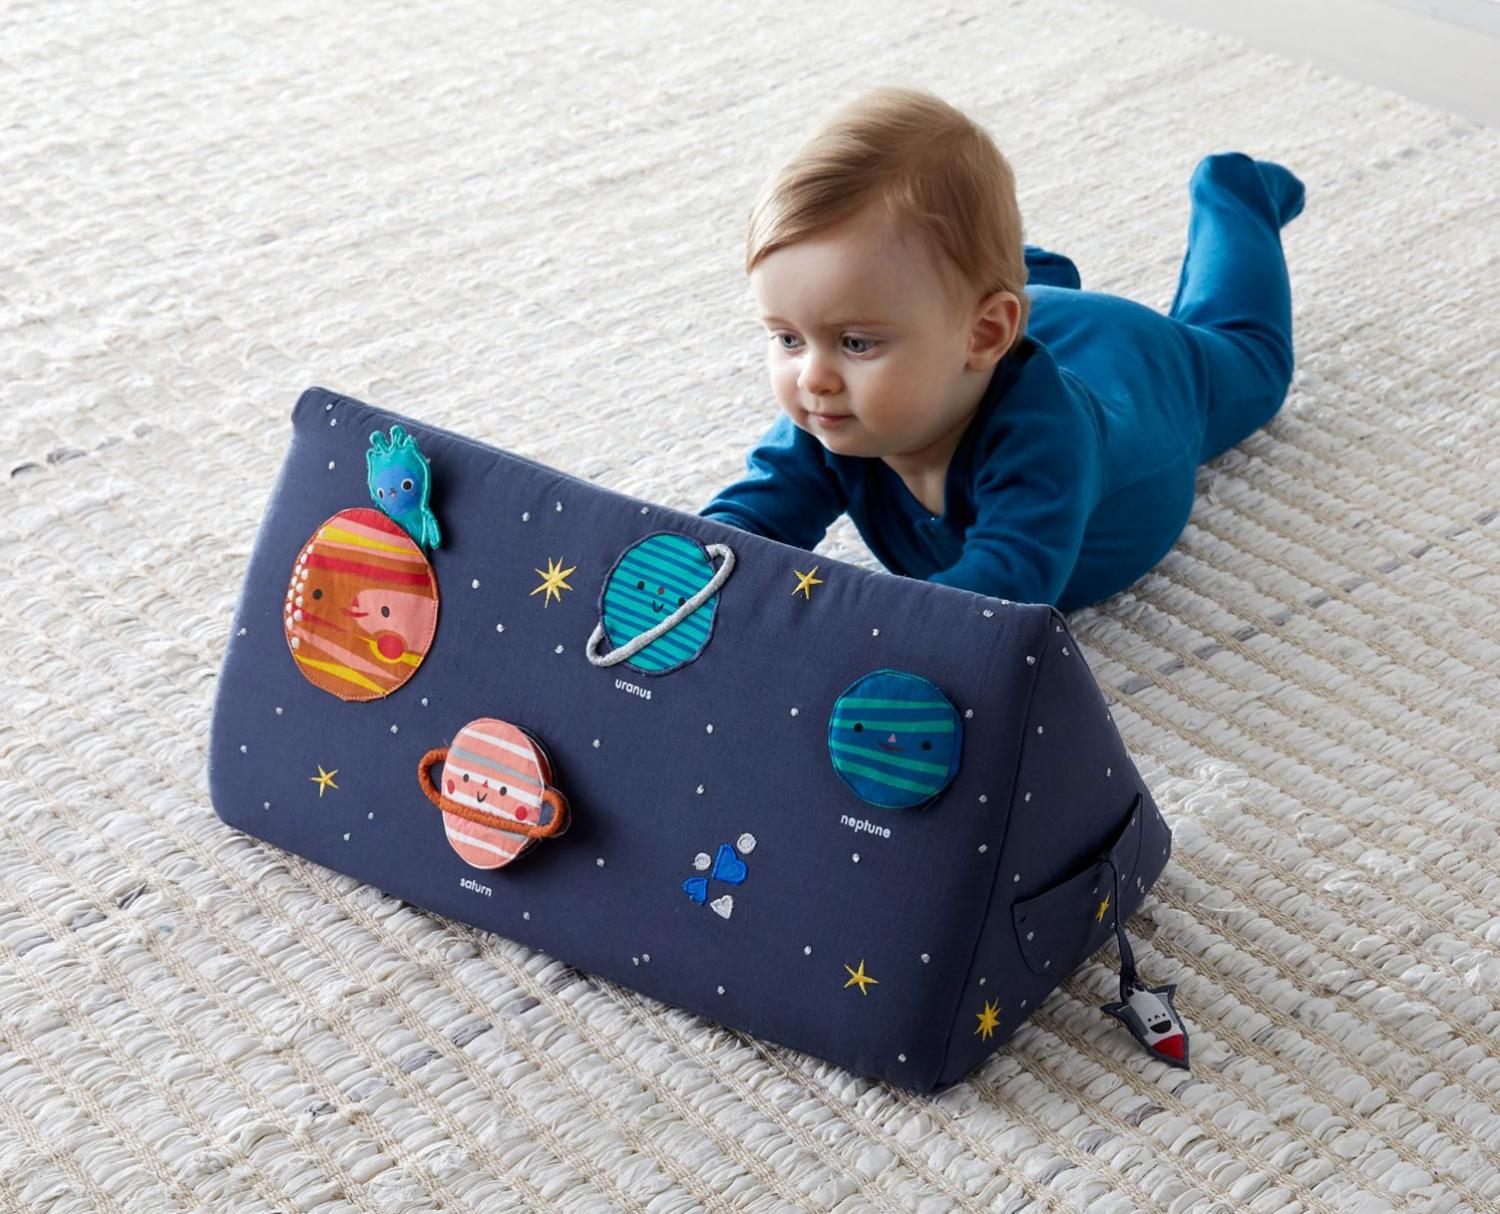 Deep Space Tummy Time Toy - Helps babies and kids learn about space